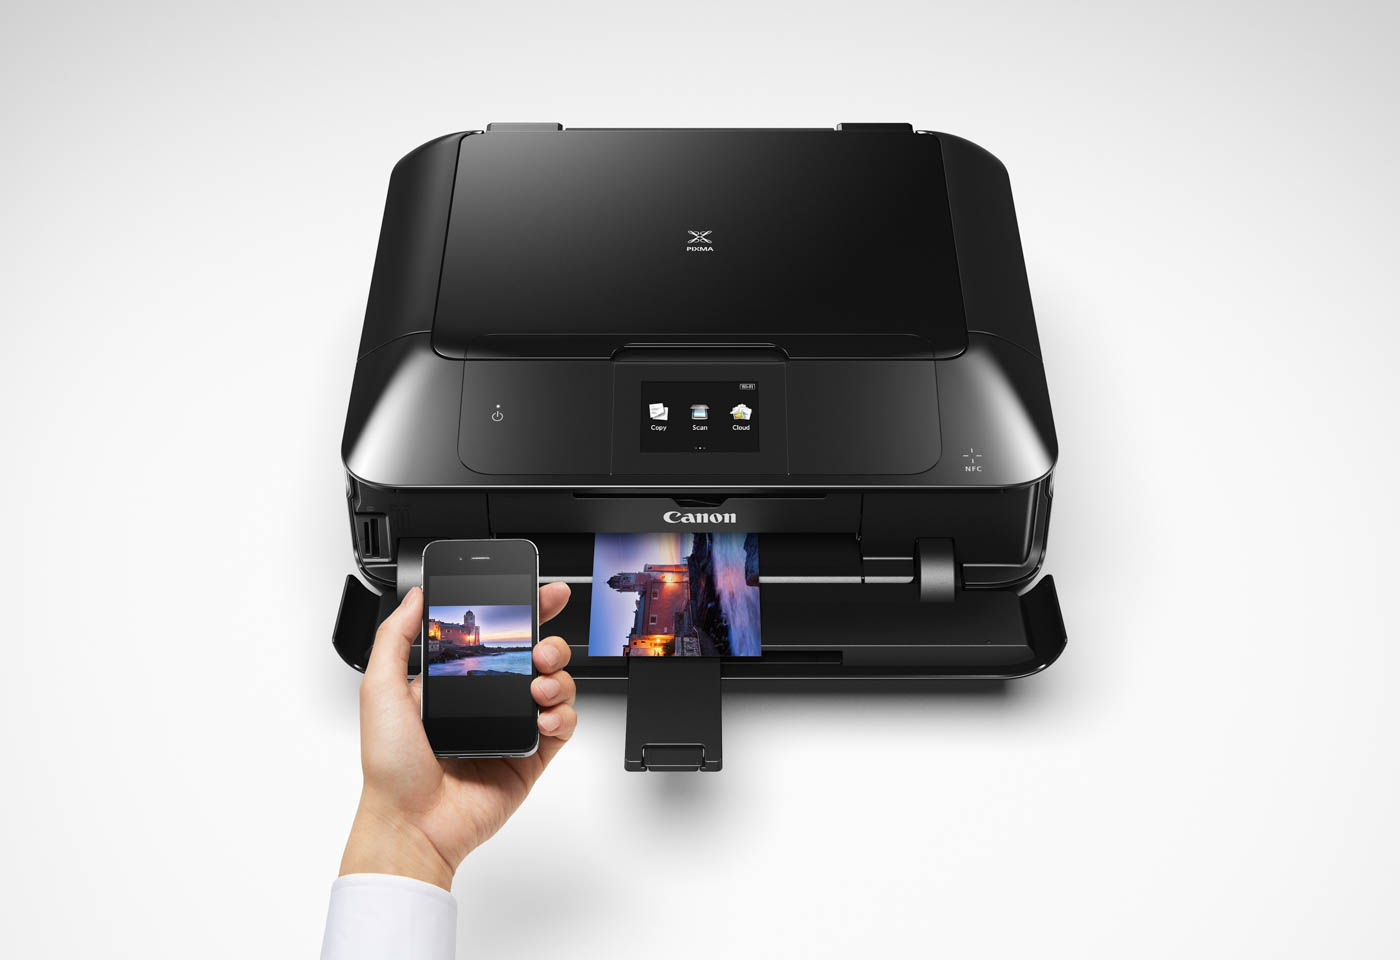 Canon PIXMA MG7760 printer with smart devices